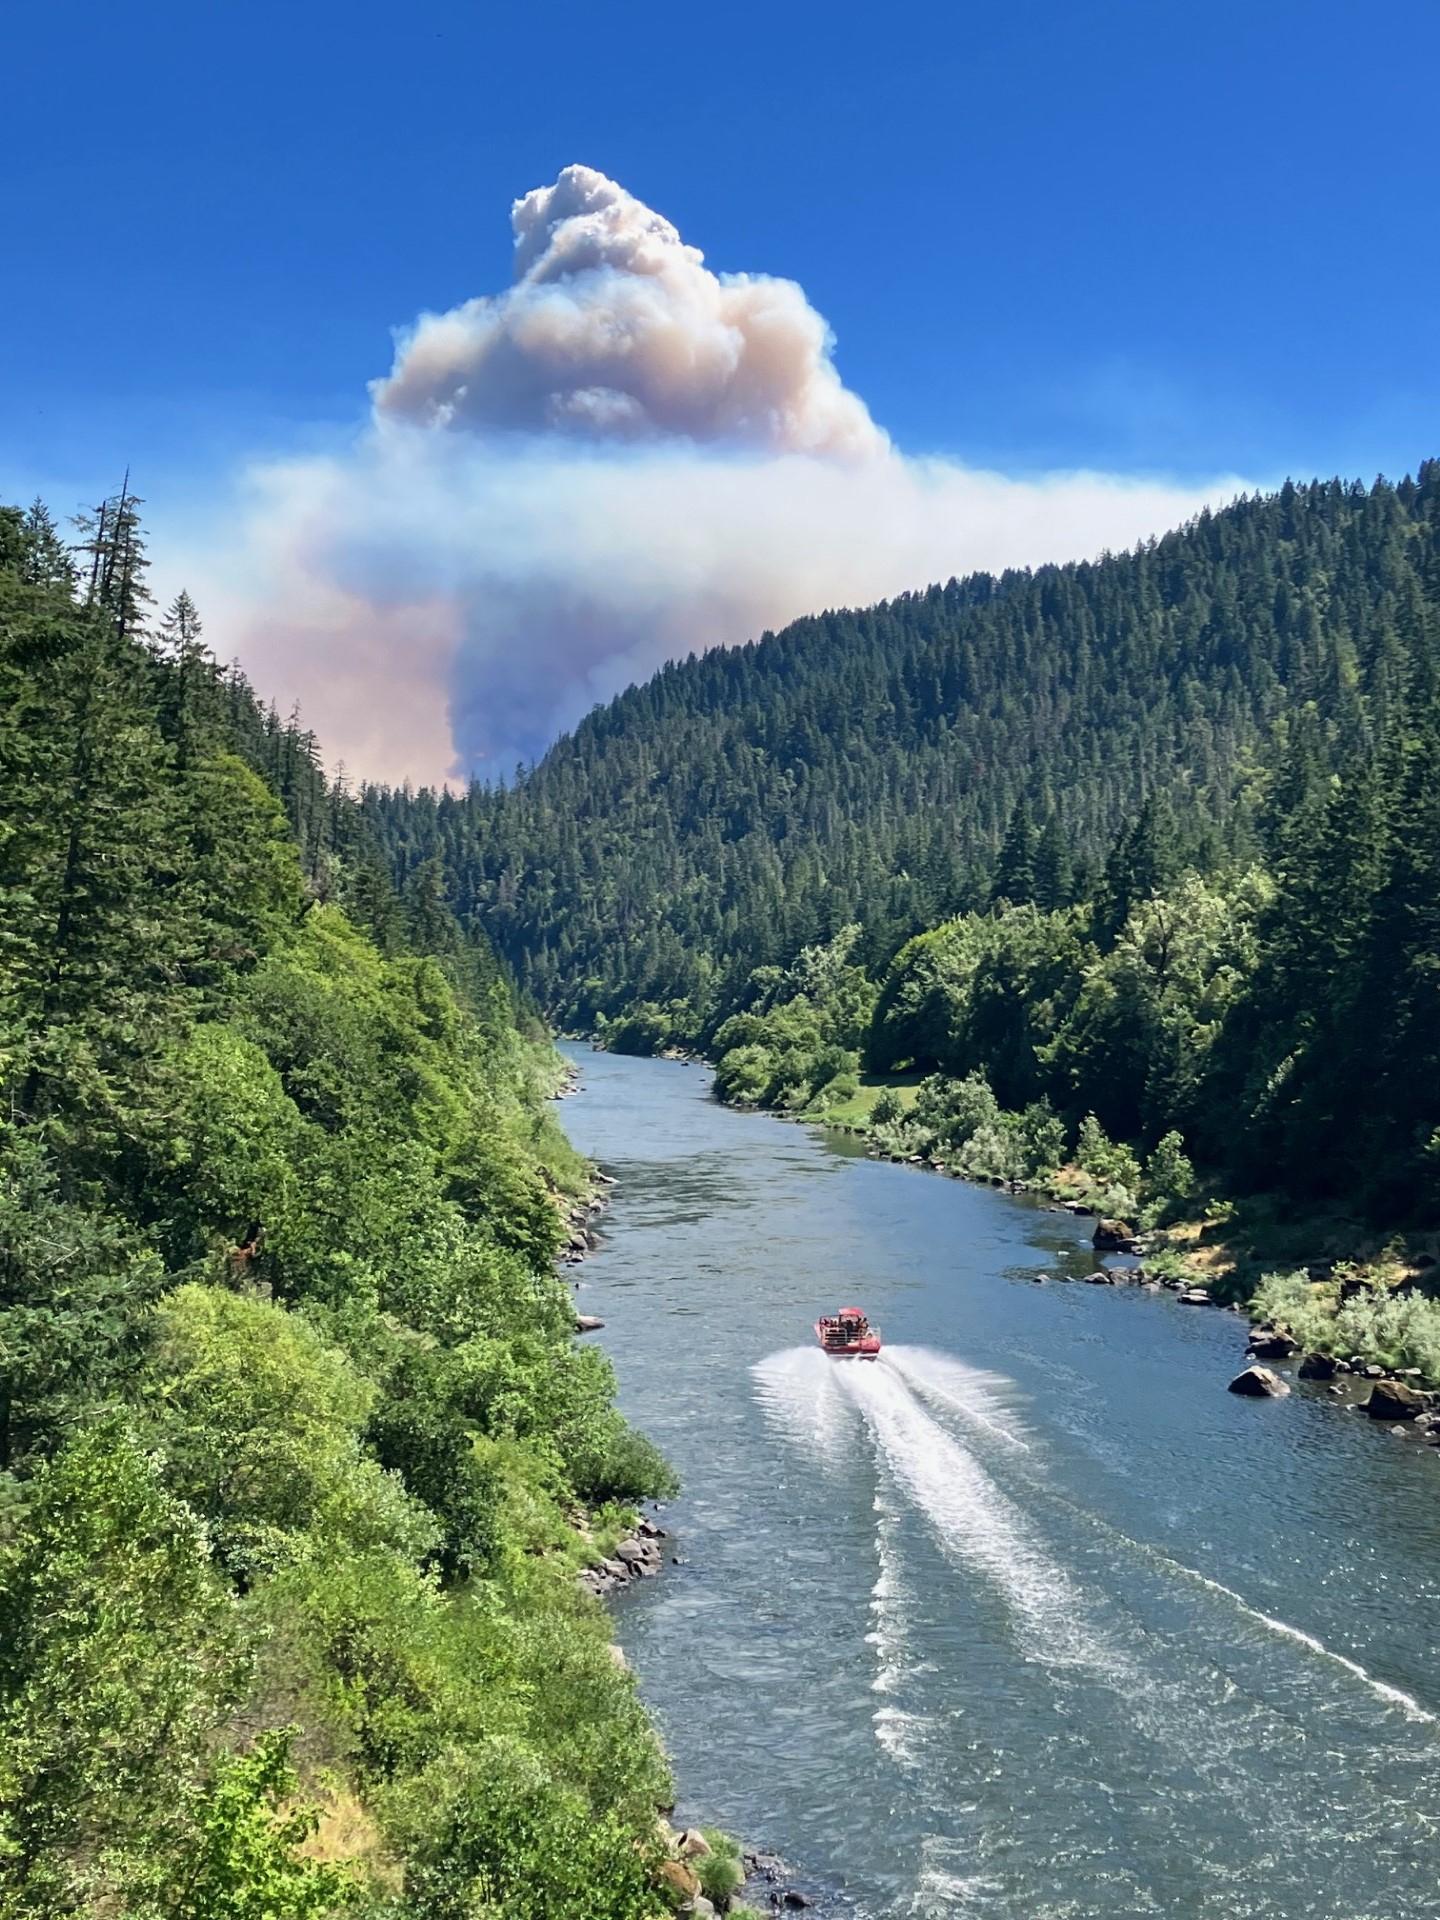 A jet boat transports firefighters up the Rogue River on July 17, 2023. The Flat Fire smoke column can be seen in the background.